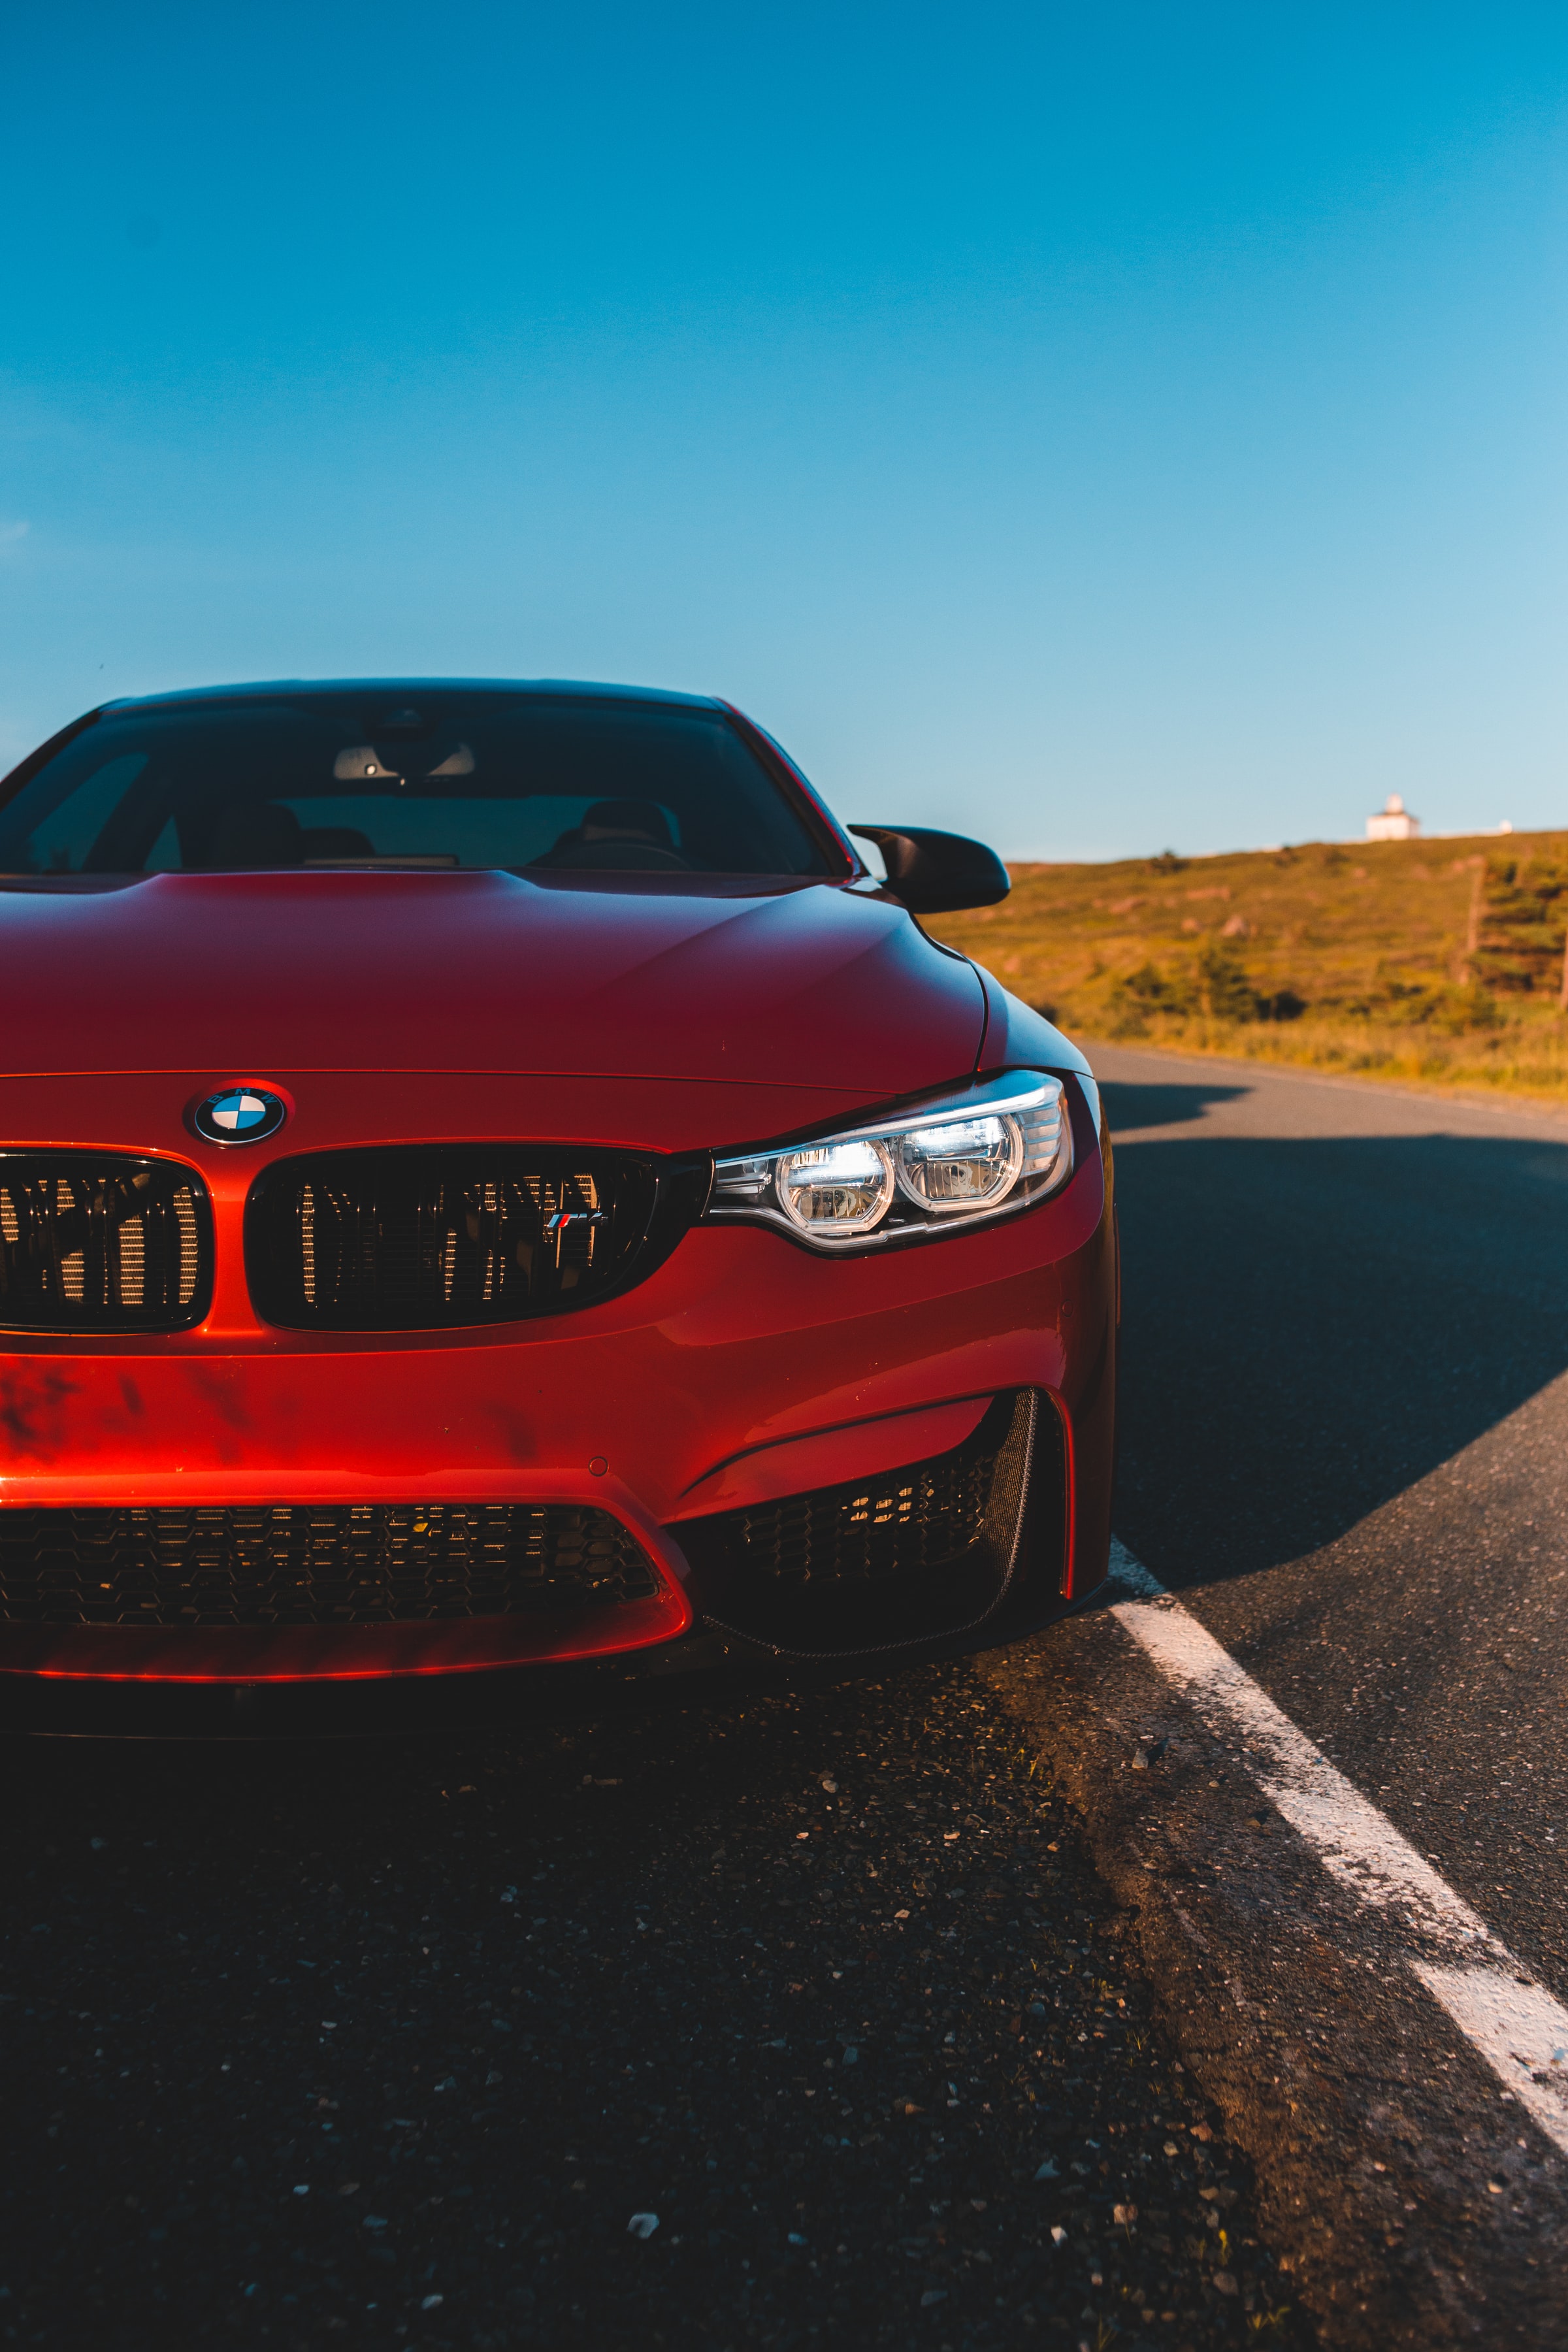 bmw, bmw m4, front view, cars, headlight, red, car